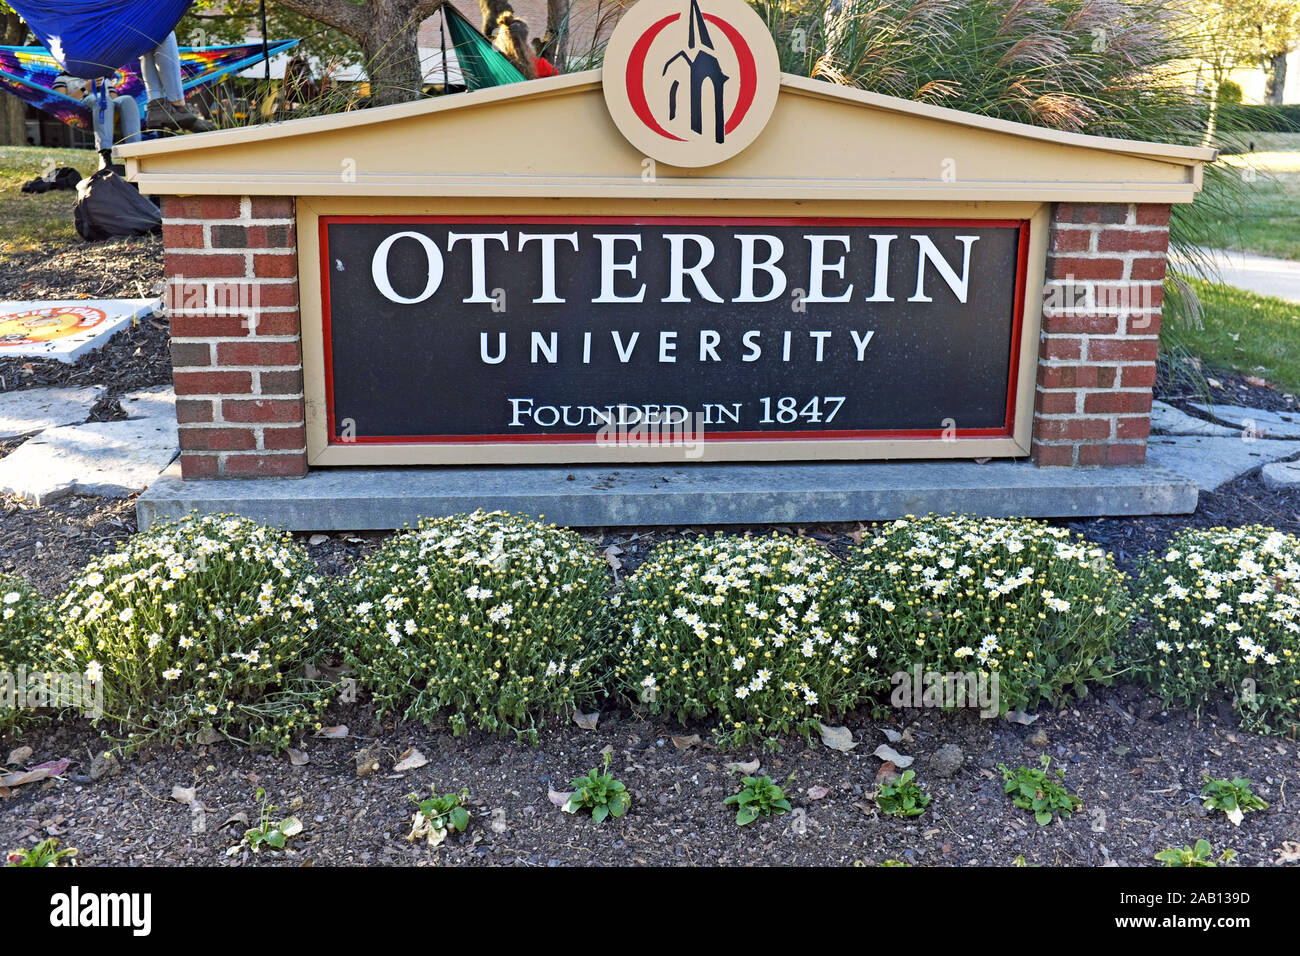 Otterbein University, founded in 1847, is a liberal arts college that is regionally accredited and located in Westerville, Ohio near Columbus. Stock Photo